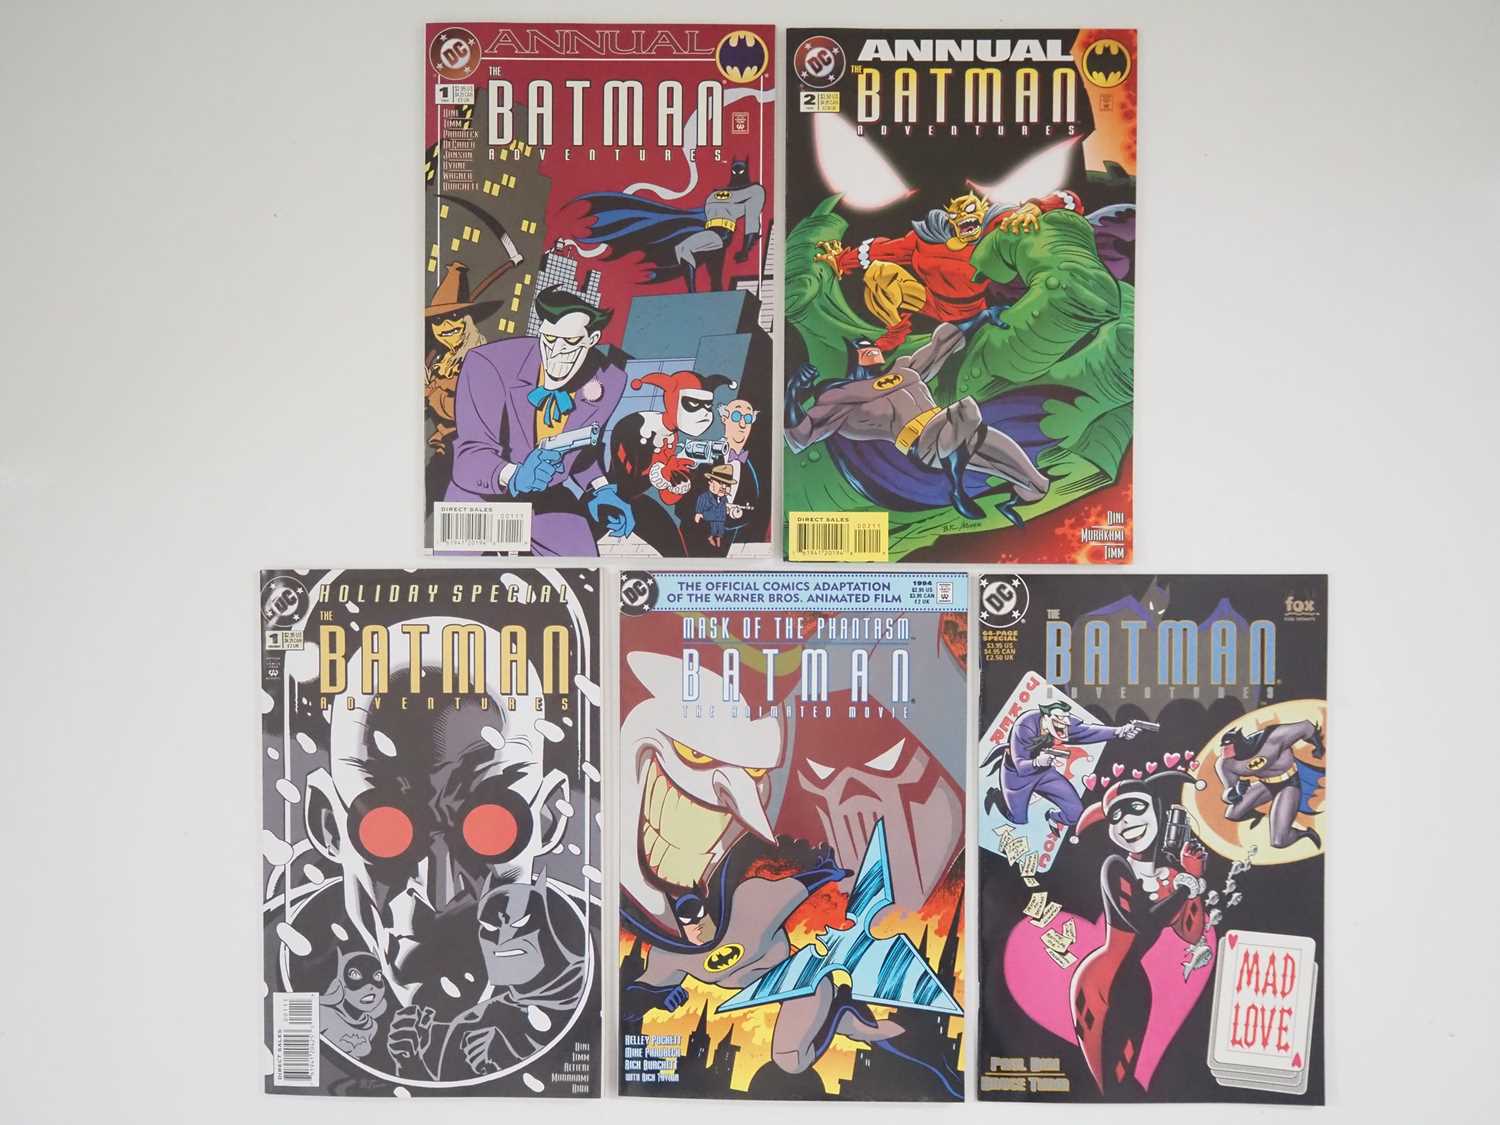 BATMAN ADVENTURES: ANNUAL #1 & 2, HOLIDAY SPECIAL #1, MAD LOVE + BATMAN THE ANIMATED MOVIE: MASK